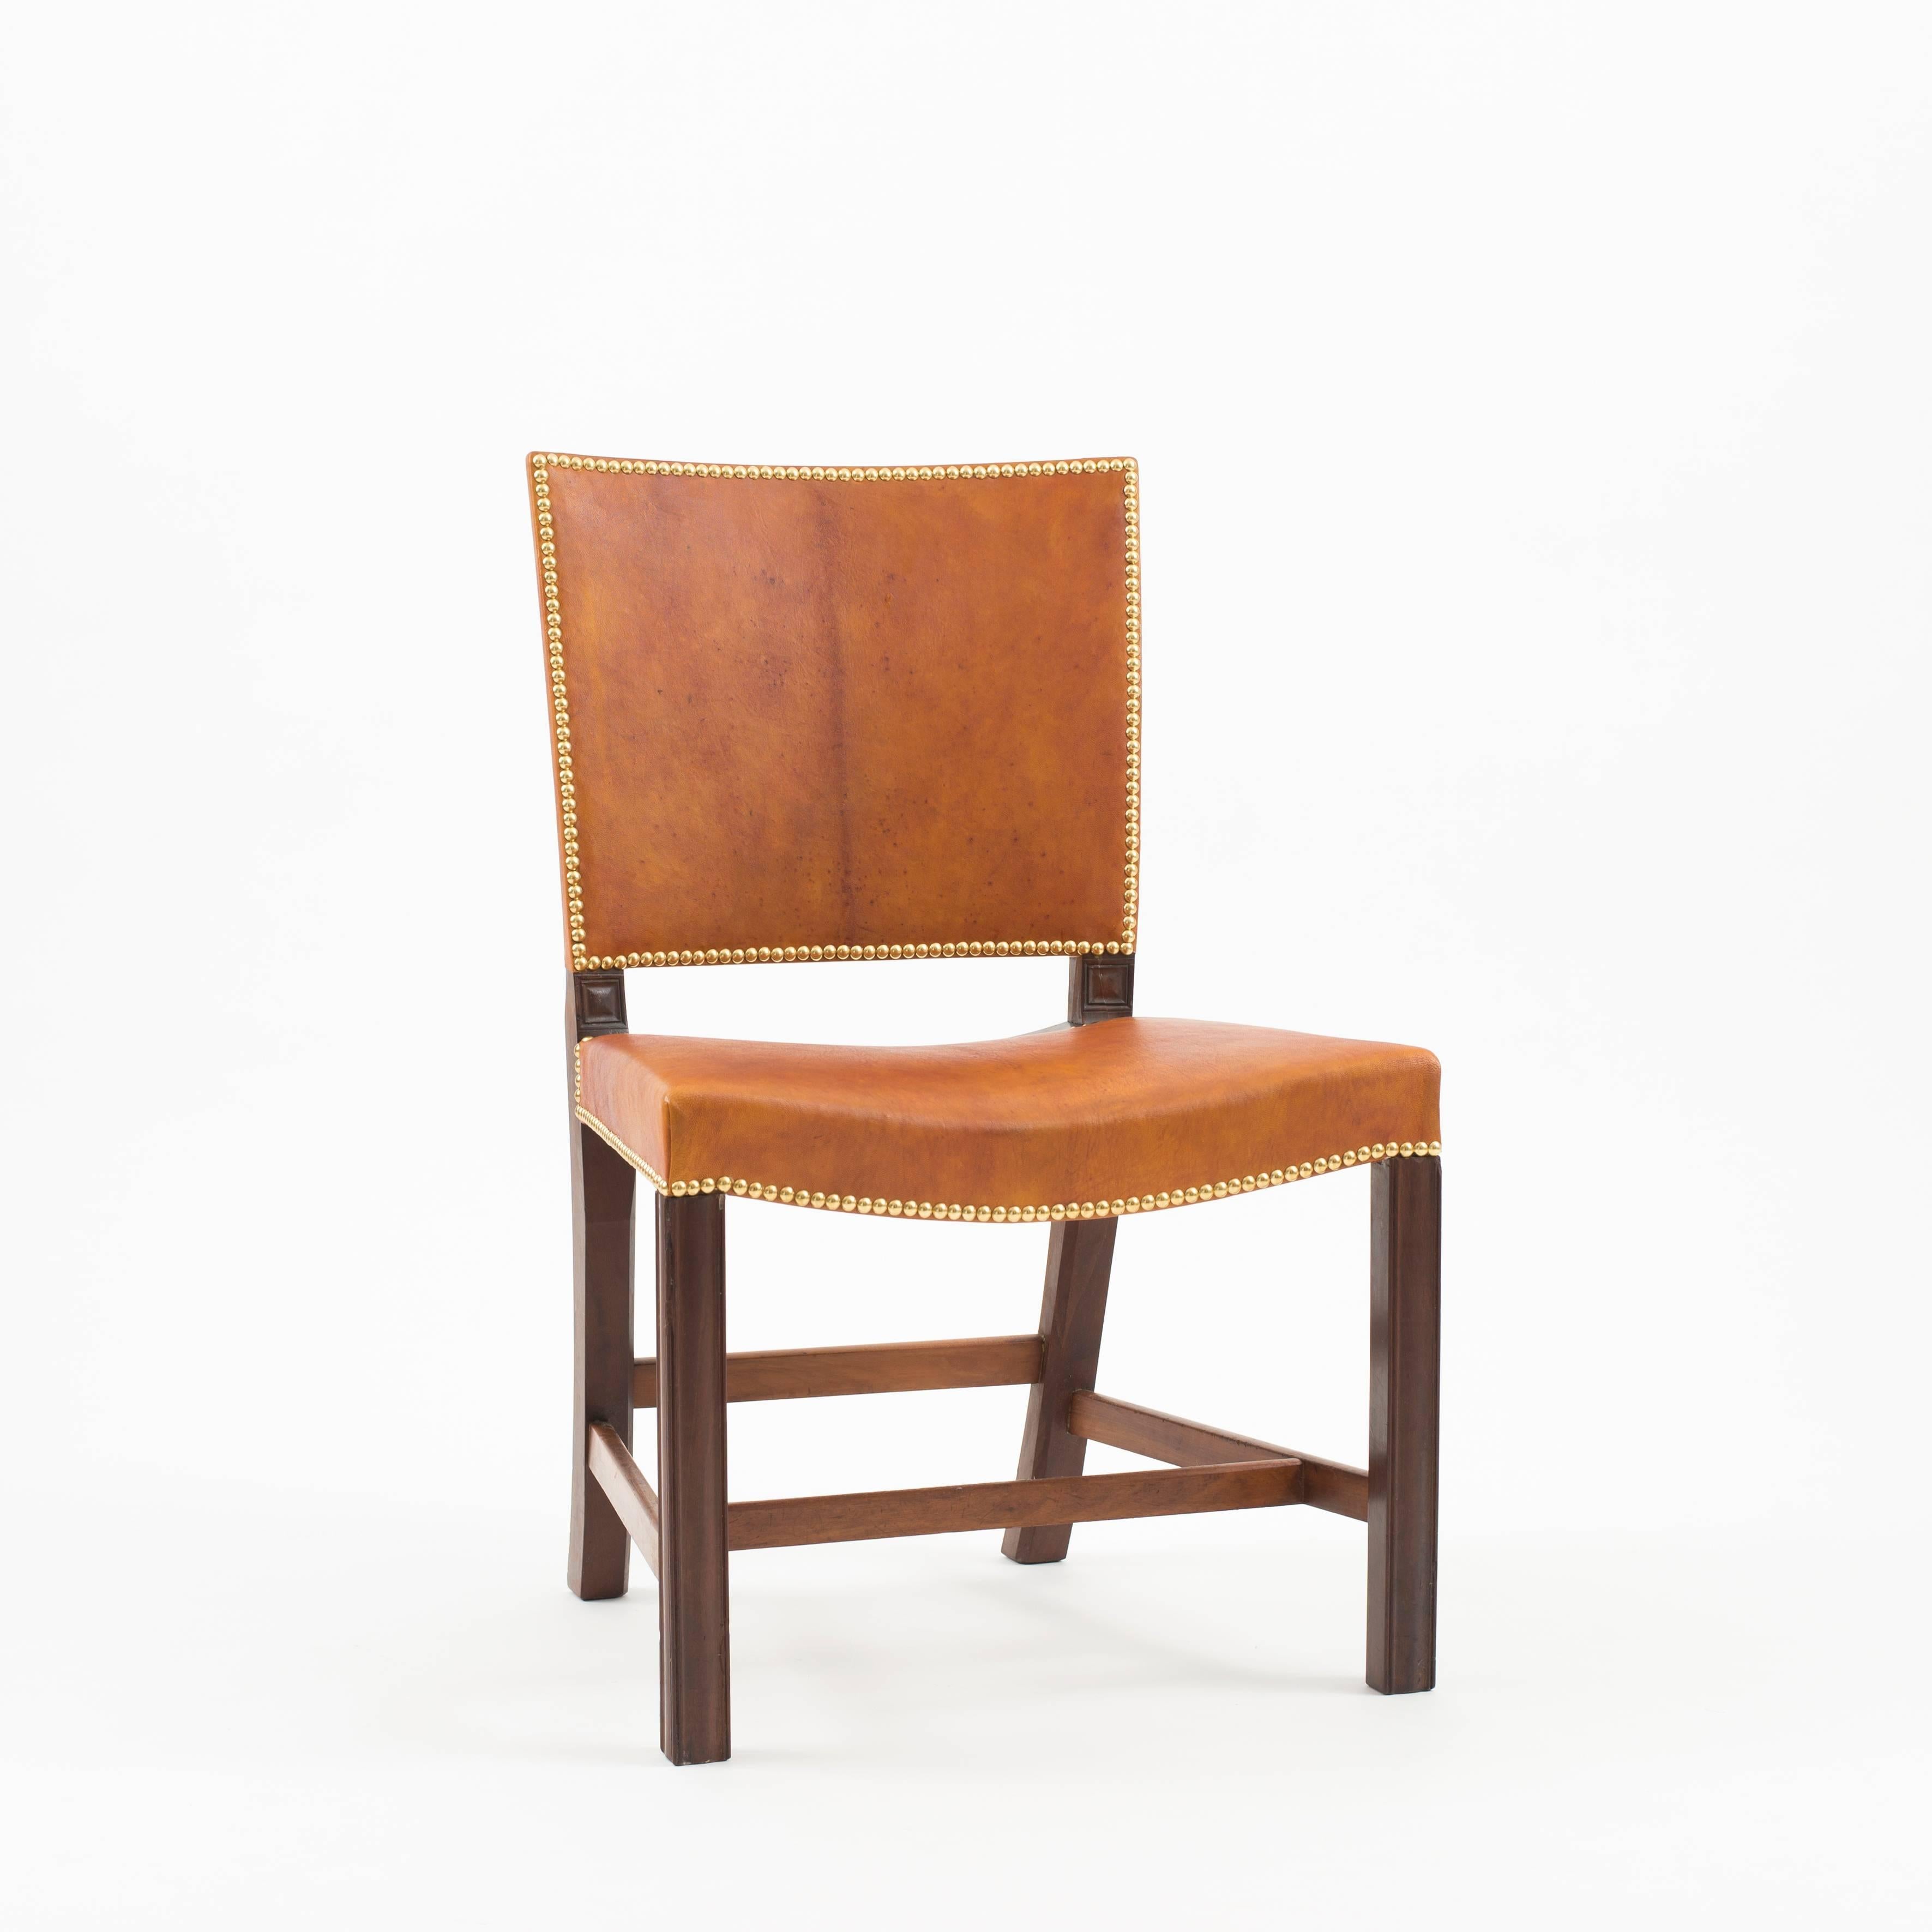 Kaare Klint red chair in Cuban mahogany, Nigerian leather and brass nails. Executed for the Danish Chamber of Commerce by C. B. Hansen in 1928.

Four chairs available.